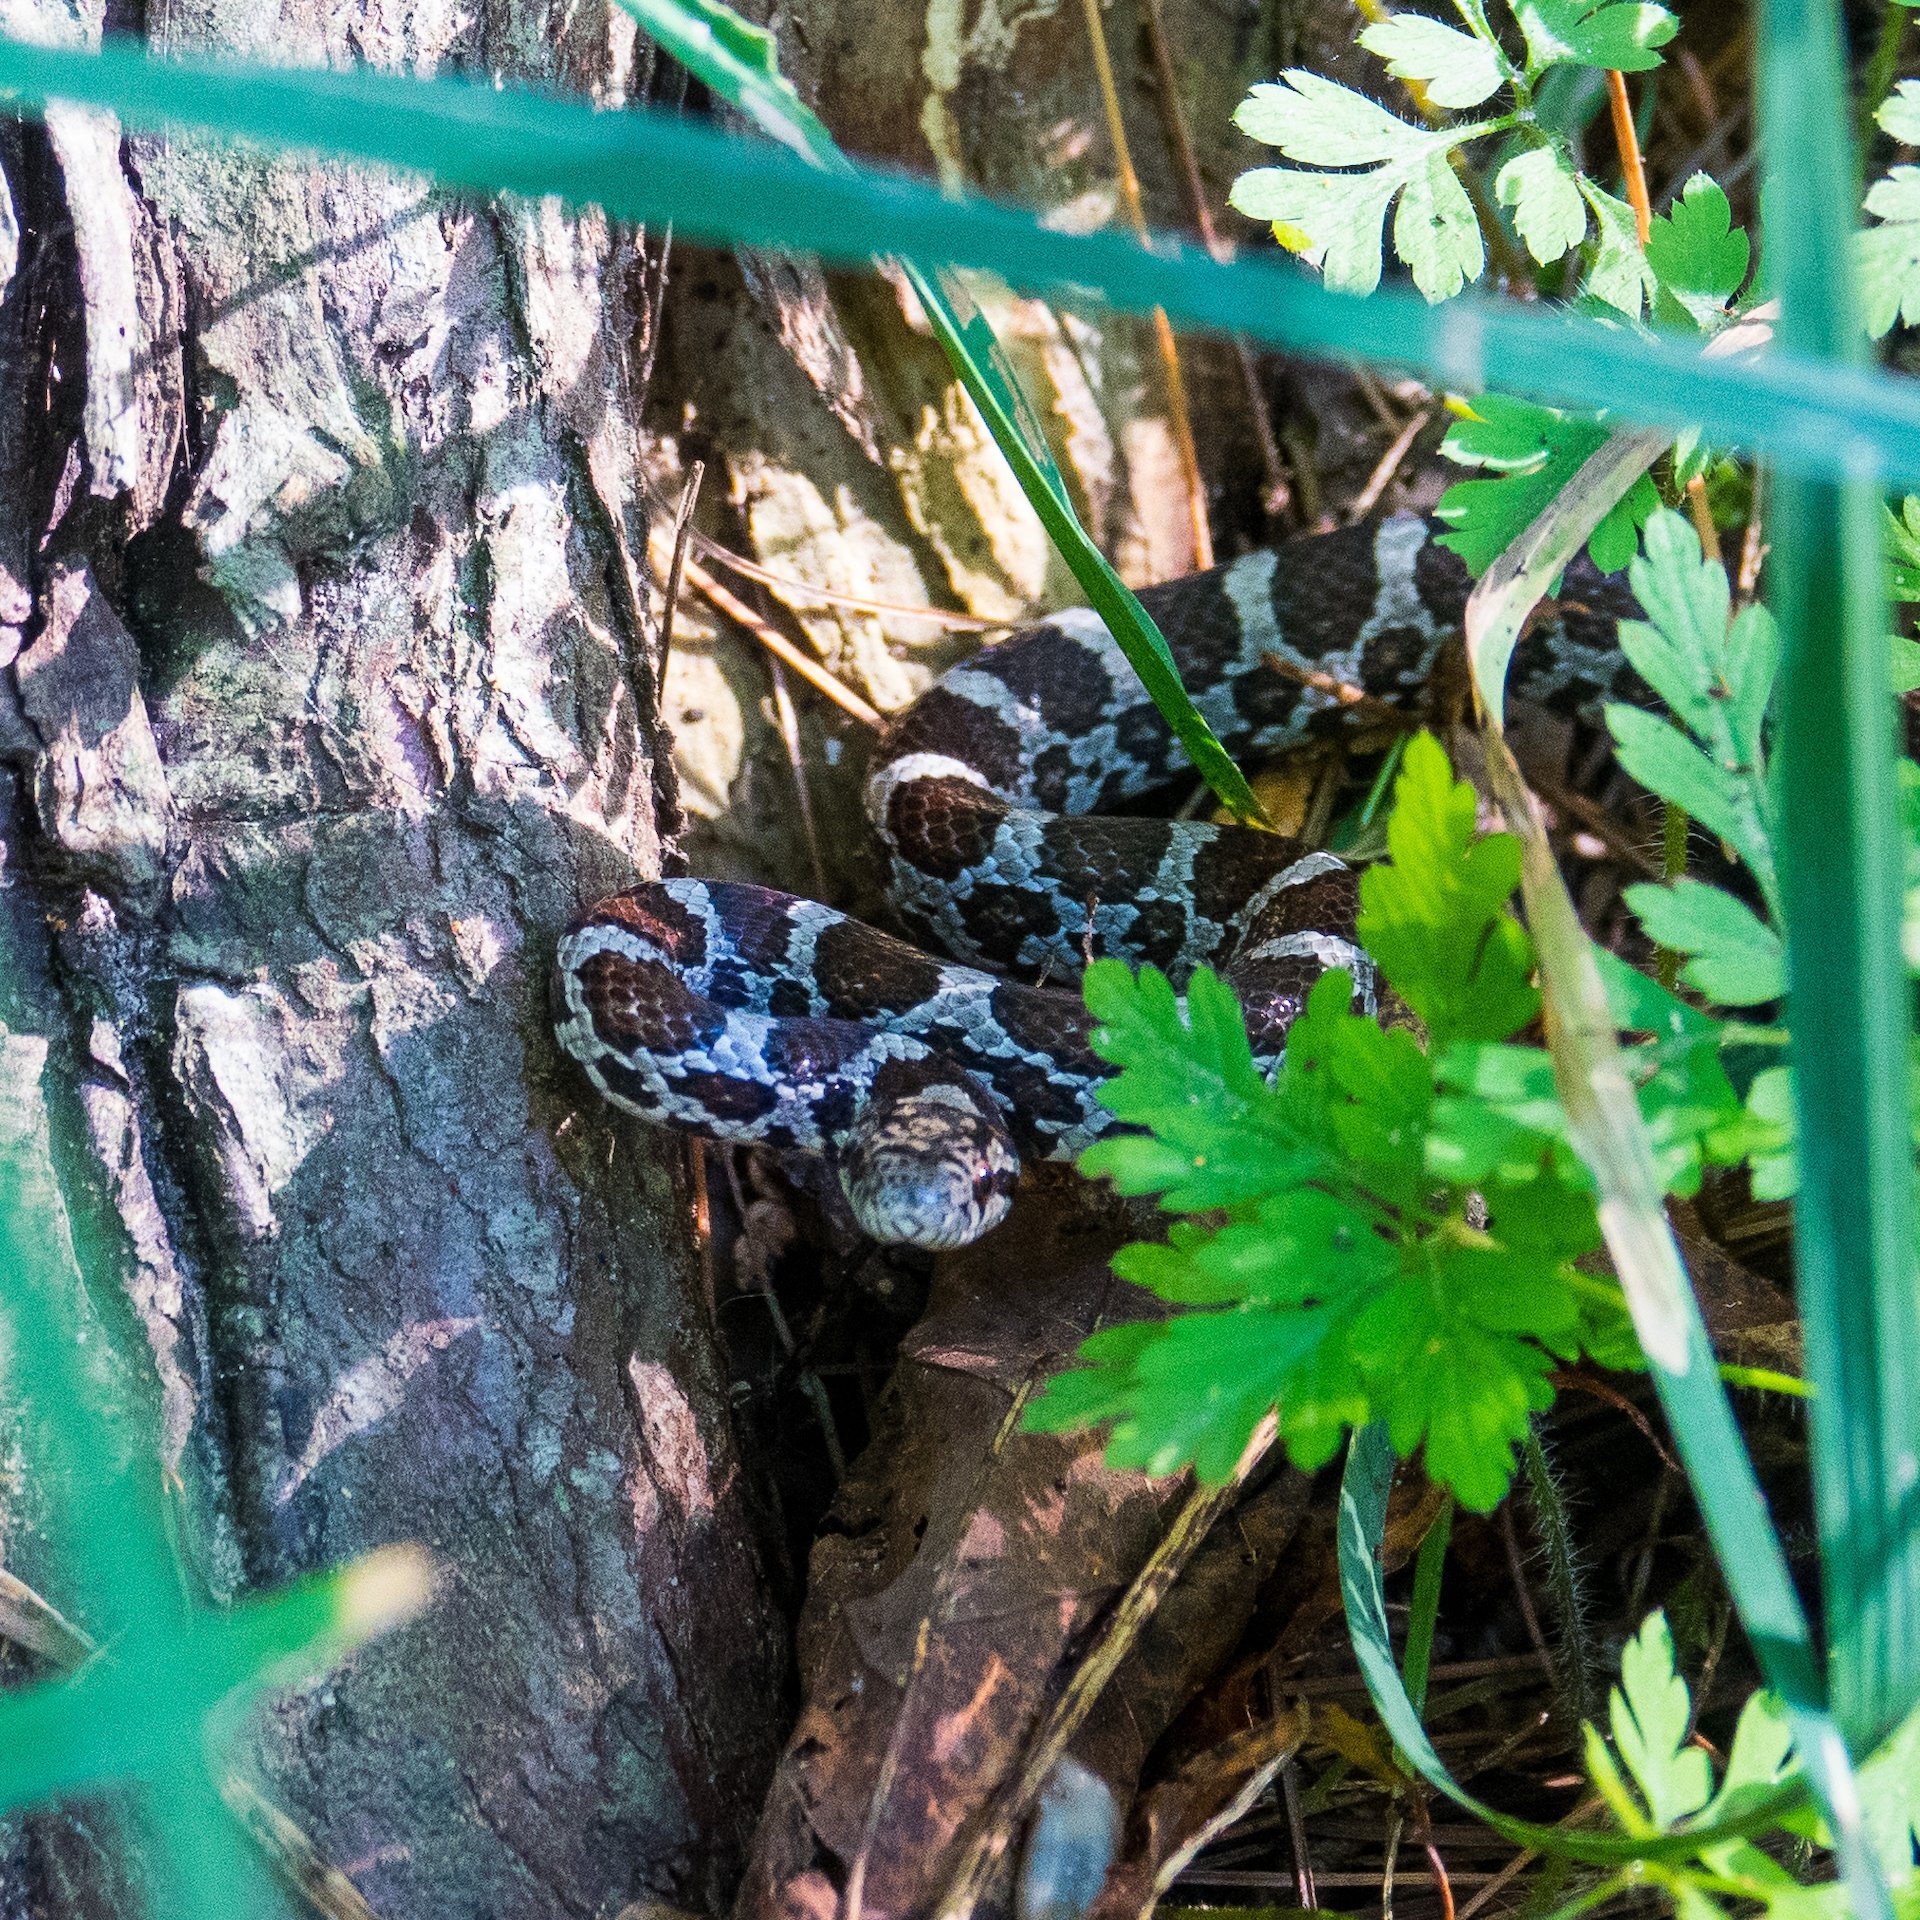  We found this tiny milk snake on our hike. 